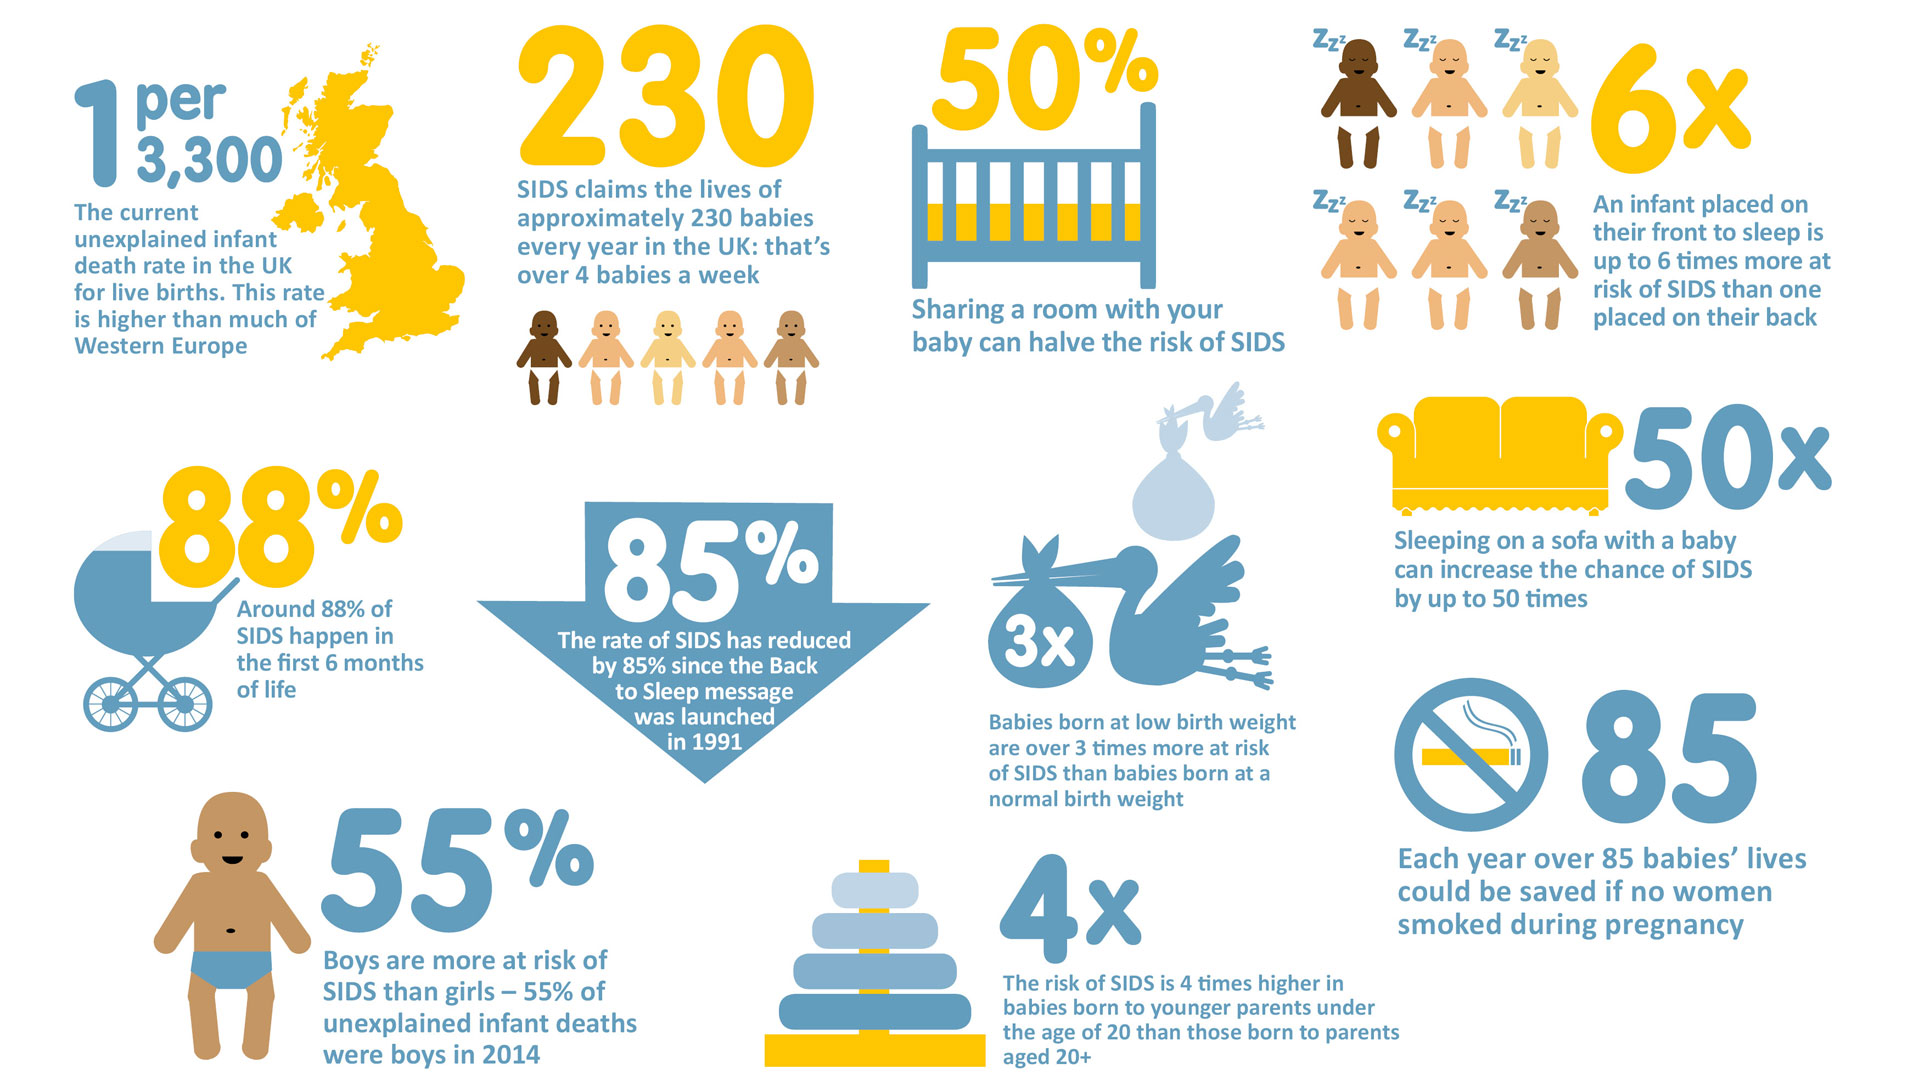 Statistics on SIDS The Lullaby Trust